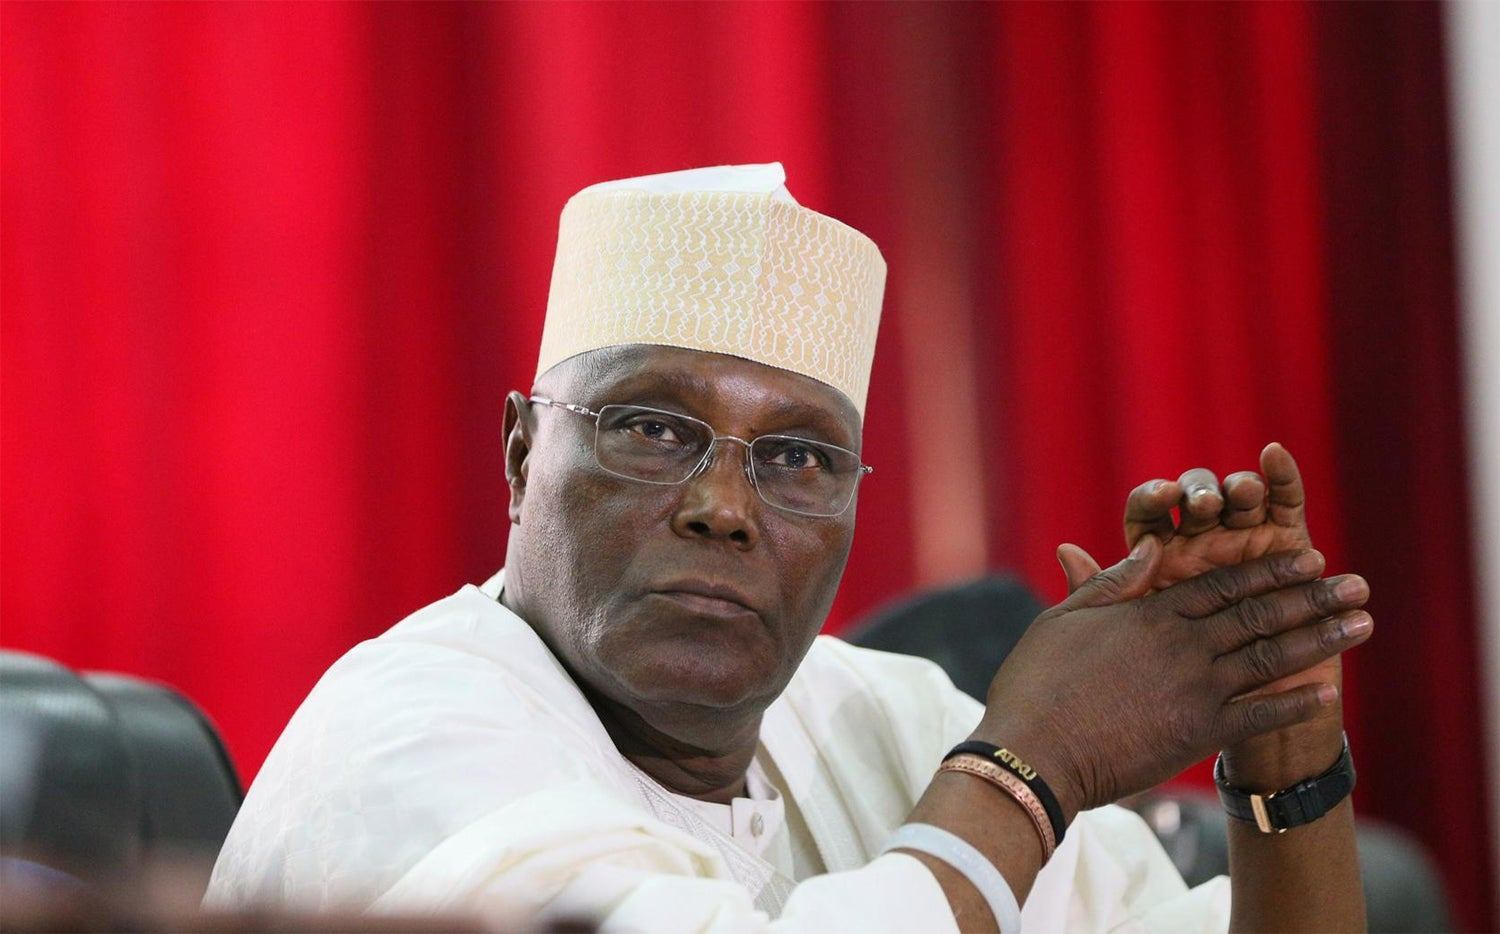 Obi of Onitsha, Vice President Atiku Abubakar, the Peoples Democratic Party's Presidential Candidate in the 2023 election